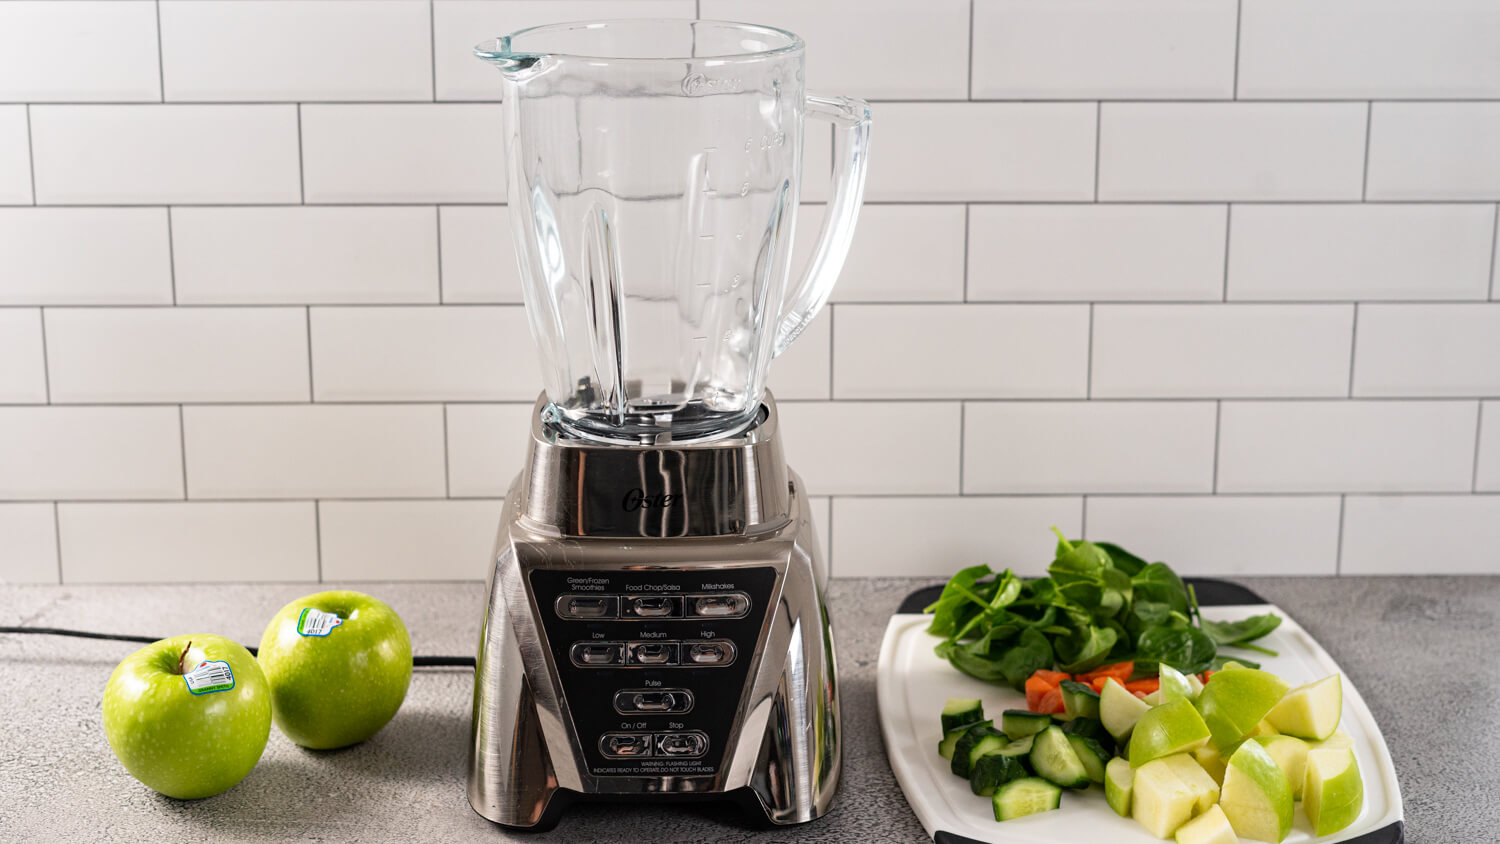 A blender with ingredients beside it to make a Green Apple Smoothie (spinach, apples, carrots, cucumbers).